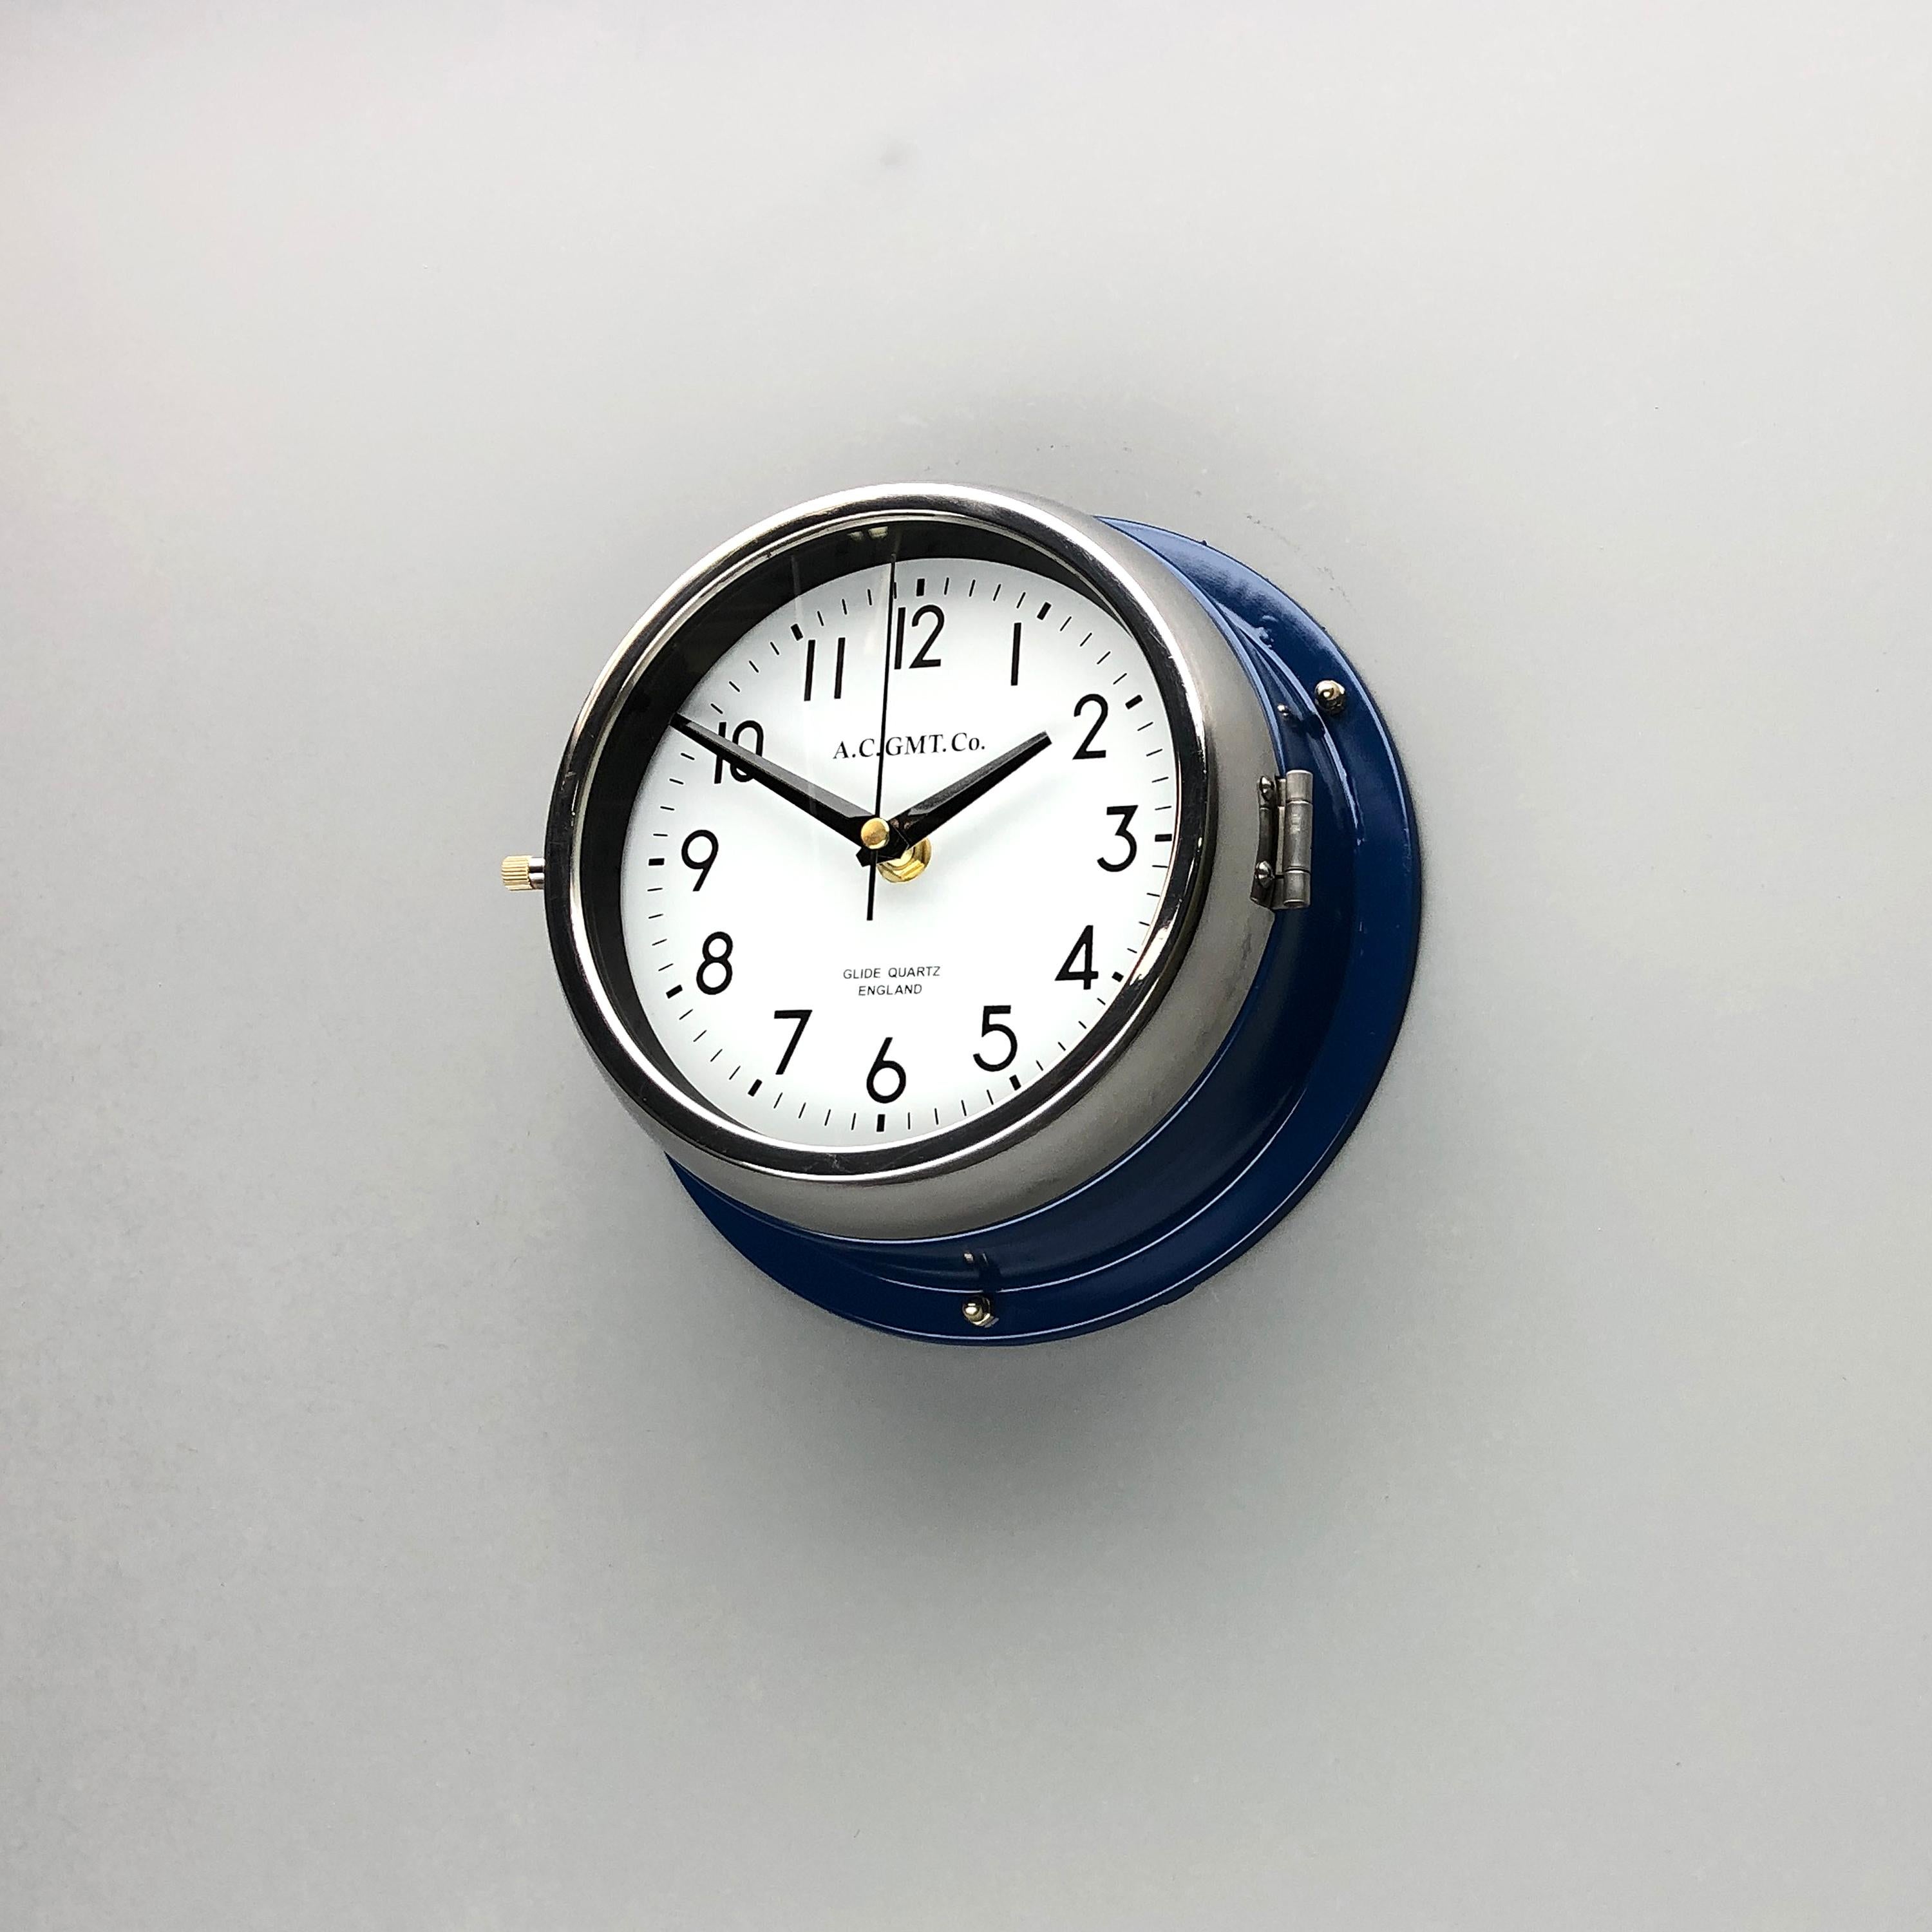 1970s British Classic Blue & Chrome AC GMT Co. Industrial Wall Clock White Dial In Excellent Condition In Leicester, Leicestershire